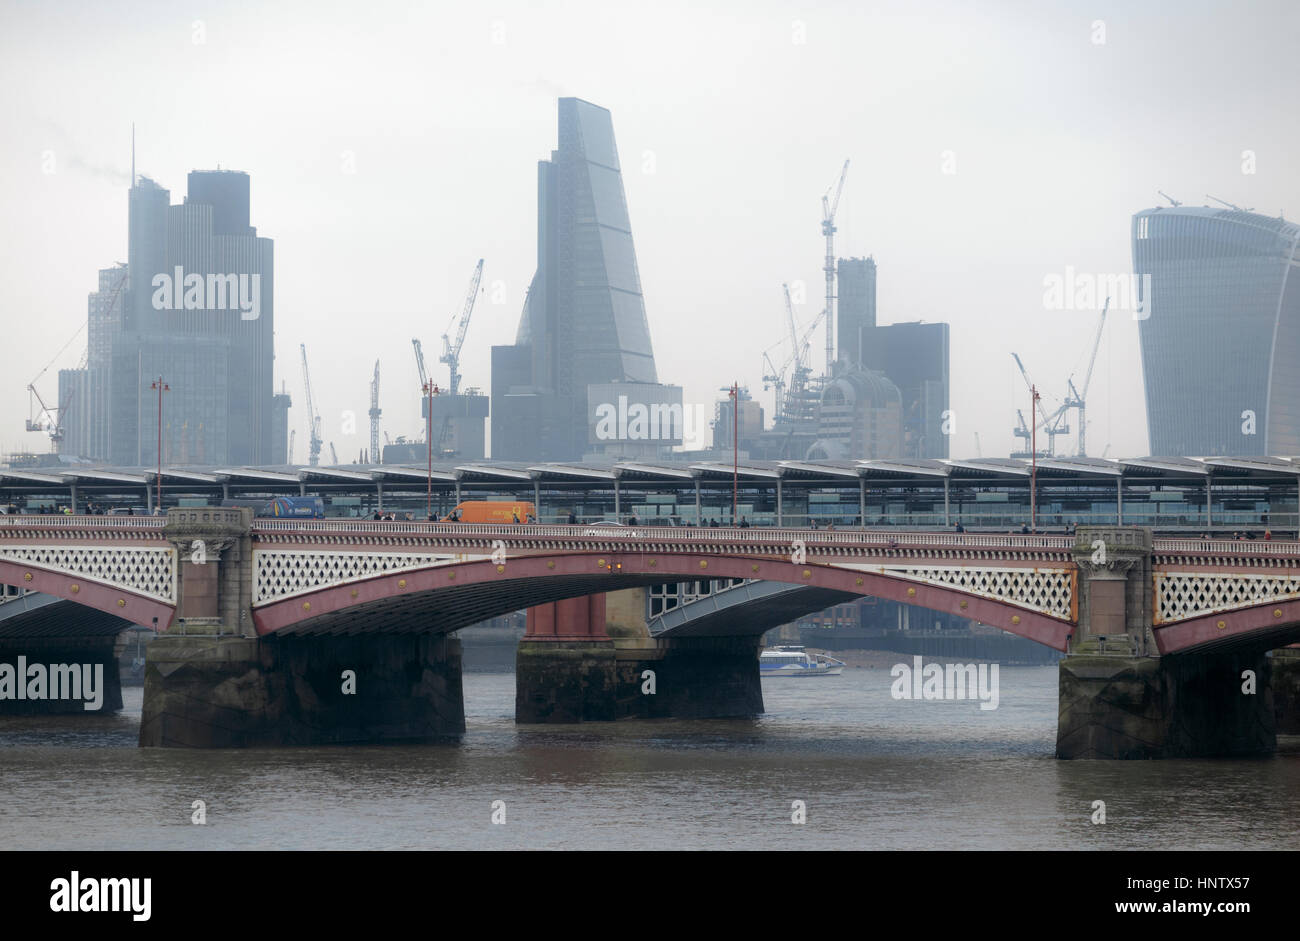 https://c8.alamy.com/comp/HNTX57/tower-42-cheesegrater-walkie-talkie-iconic-skyscrapers-on-the-city-HNTX57.jpg